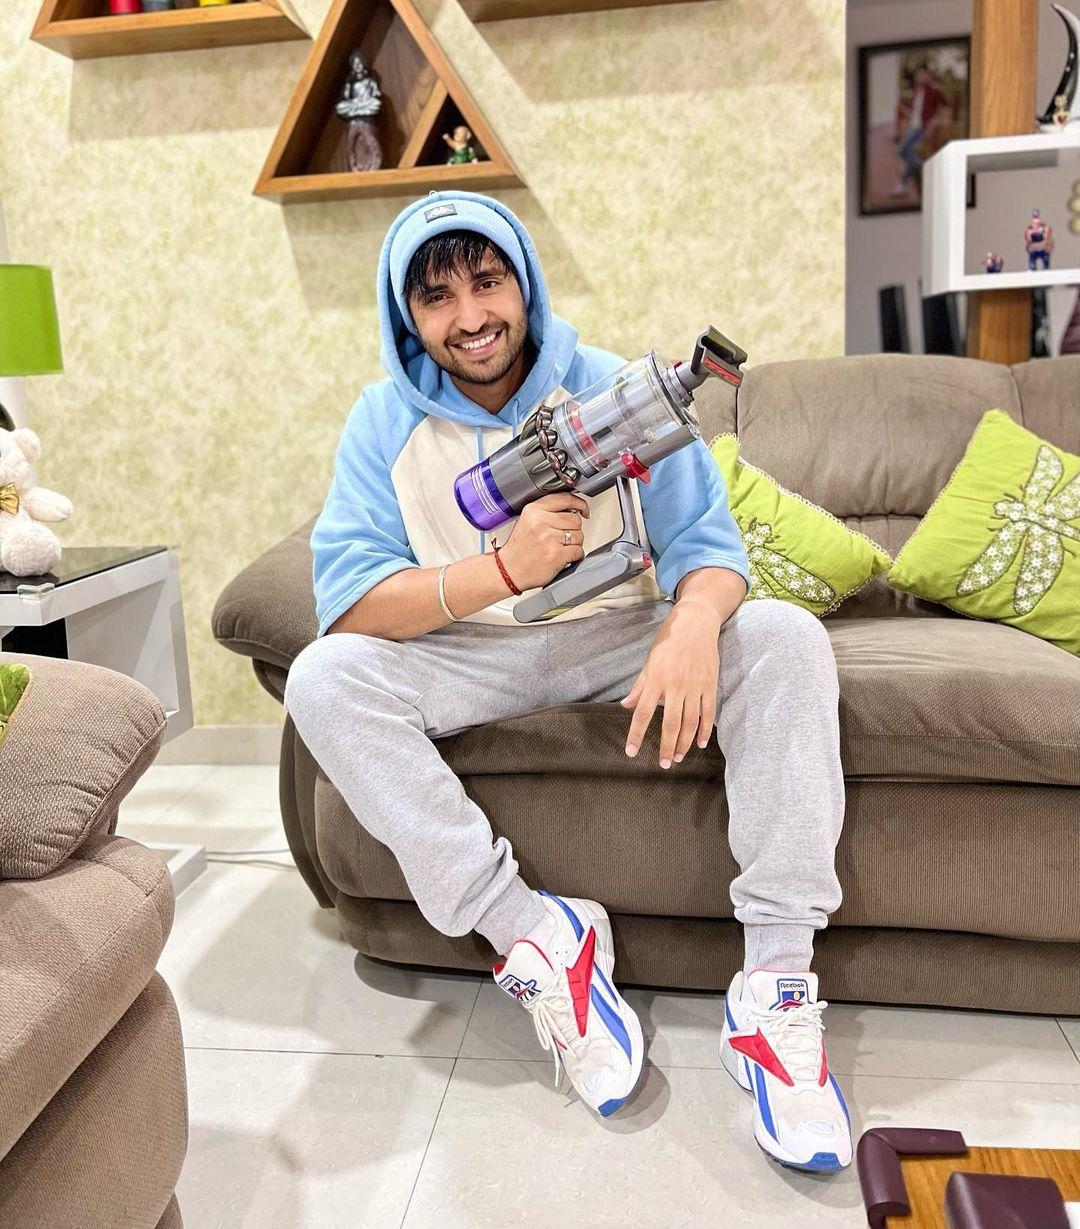 #Gifted With kids around the house,making sure your house is dust and allergen free is a must therefore I decided to invest in @Dyson_india’s V11,a powerful cord free vacuum.

Various attachments, 3 intelligent cleaning modes, driven with technology- its a masterpiece.

#DysonIndia
#DysonV11
#DysonHome
#Collab